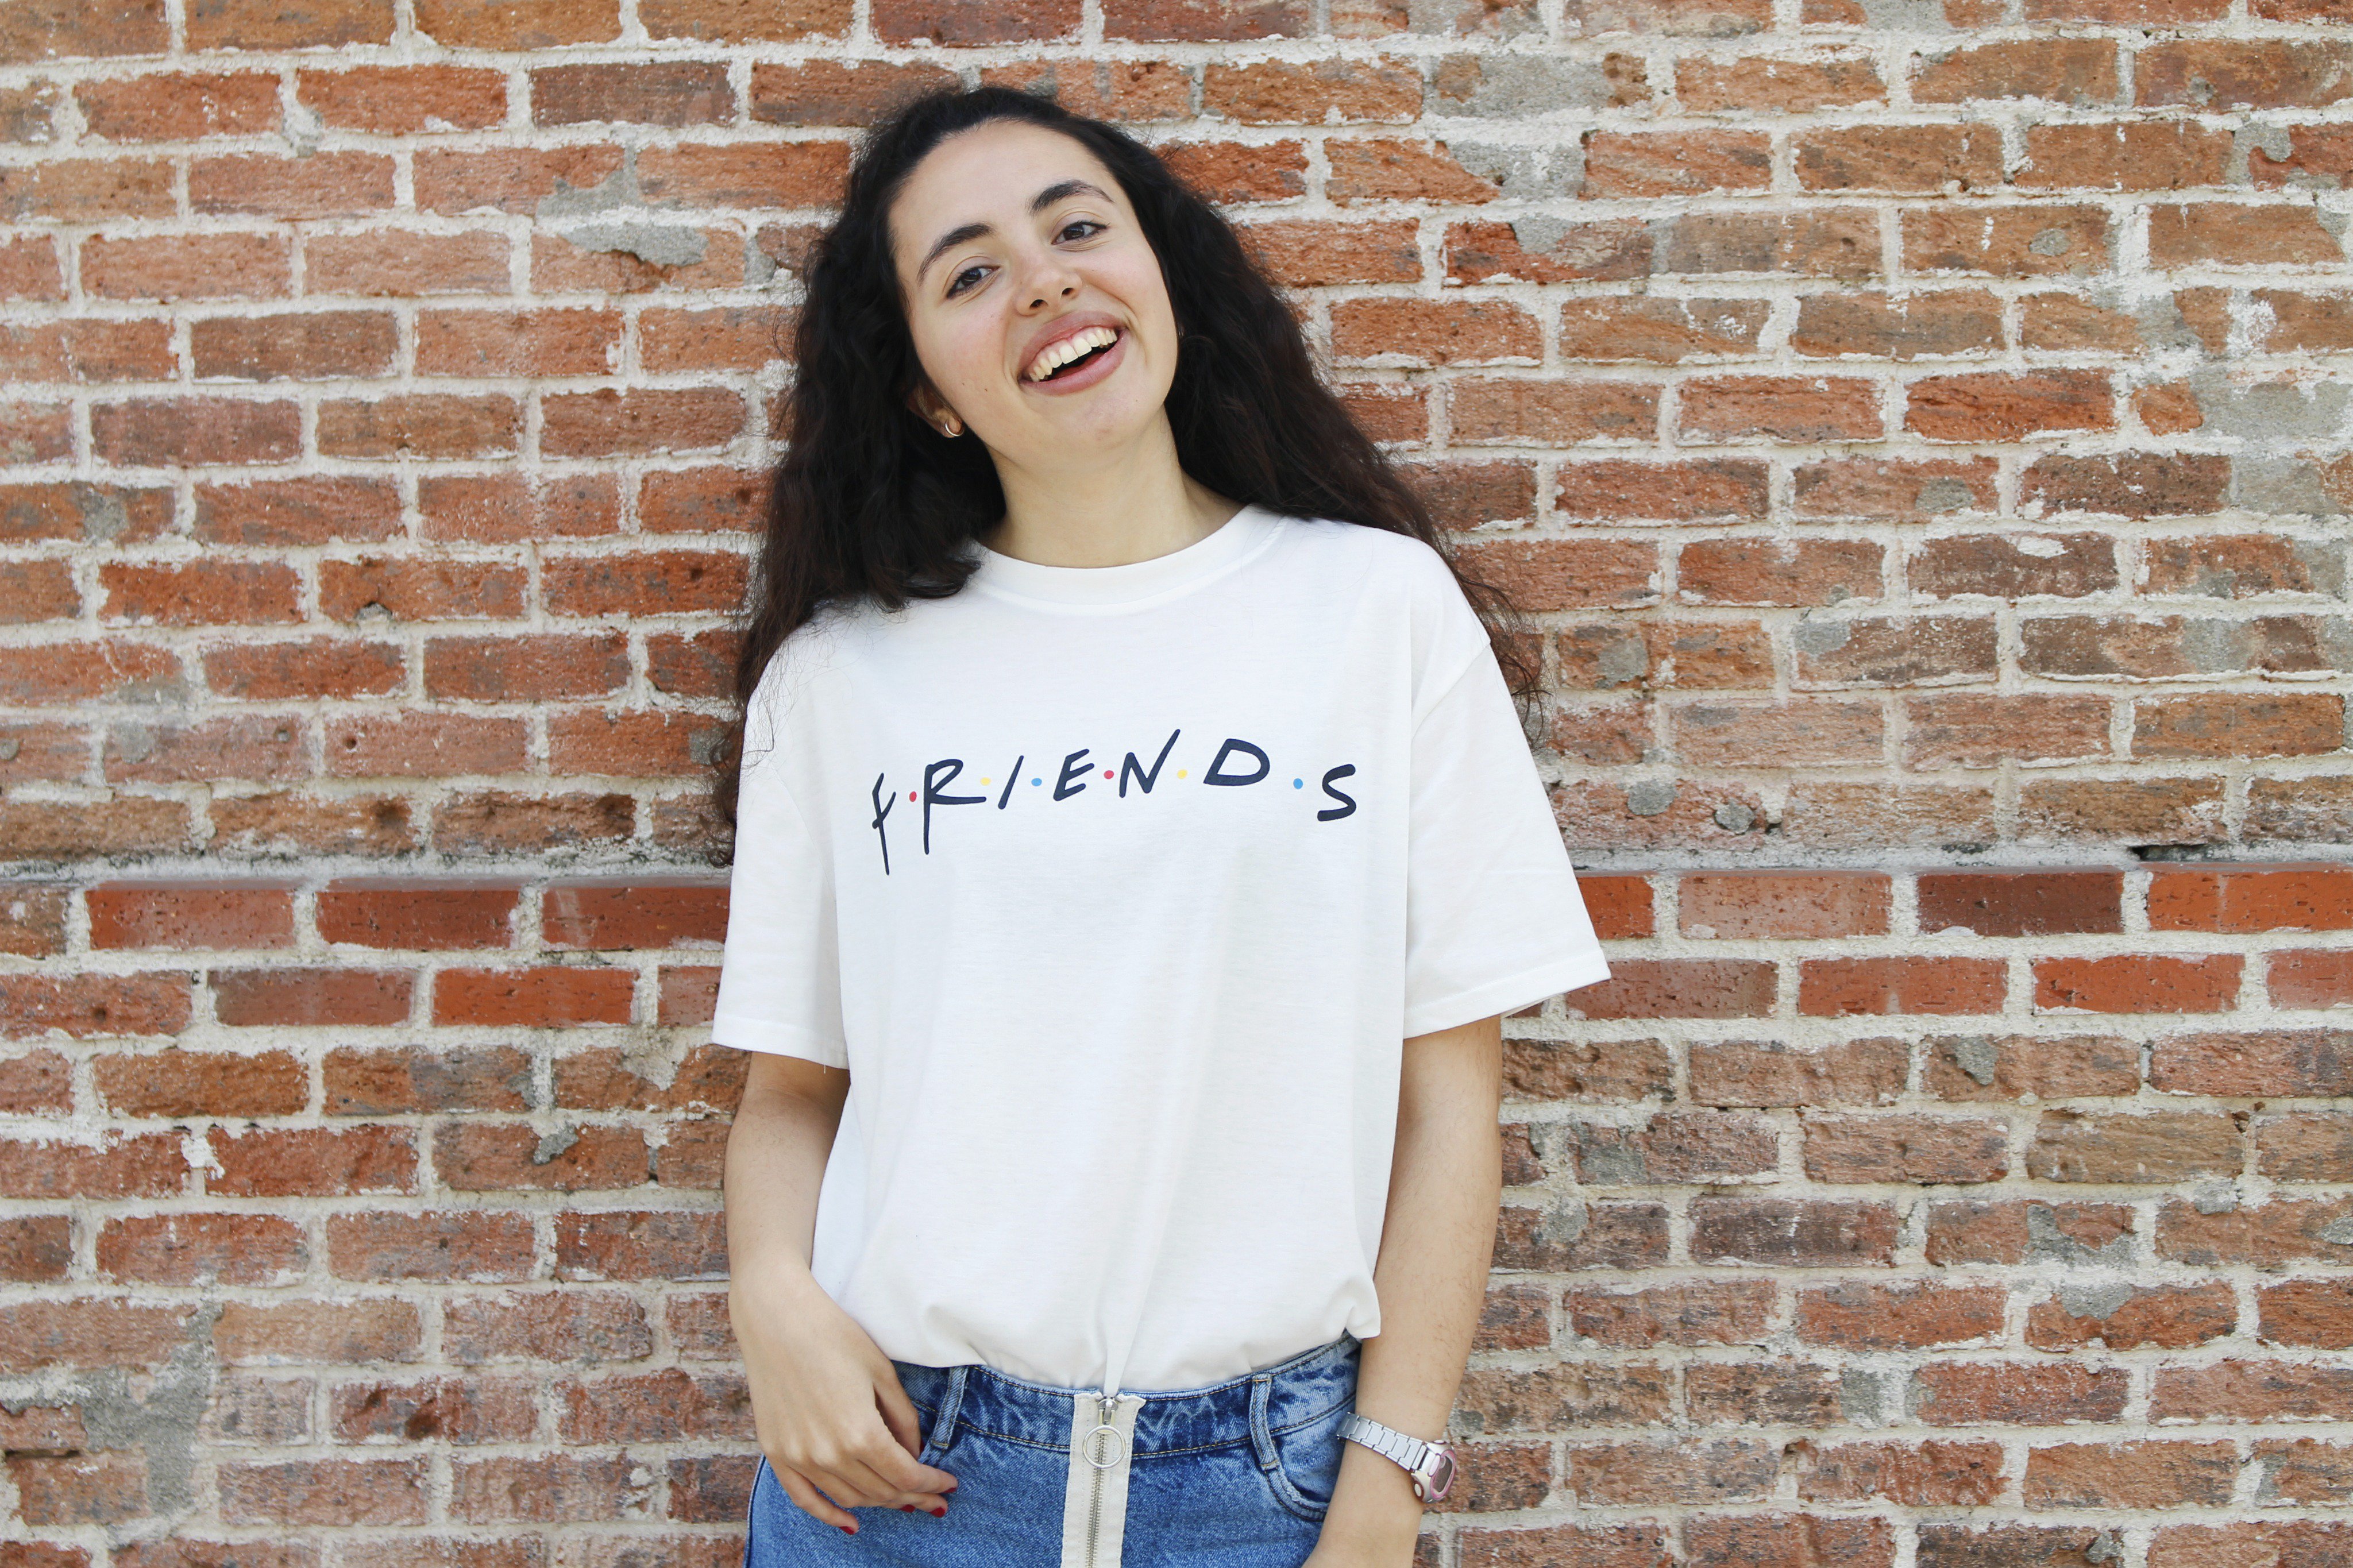 Ana Twitter: "NUEVO POST! Outfit con camiseta Friends https://t.co/S8cE78b8Ec @FriendsTV @zaful_official @stradivarius @zaraes #ootd #look #fashionblogger #blogger #outfit #primavera #moda https://t.co/GeeS0Vs9Bz" / Twitter